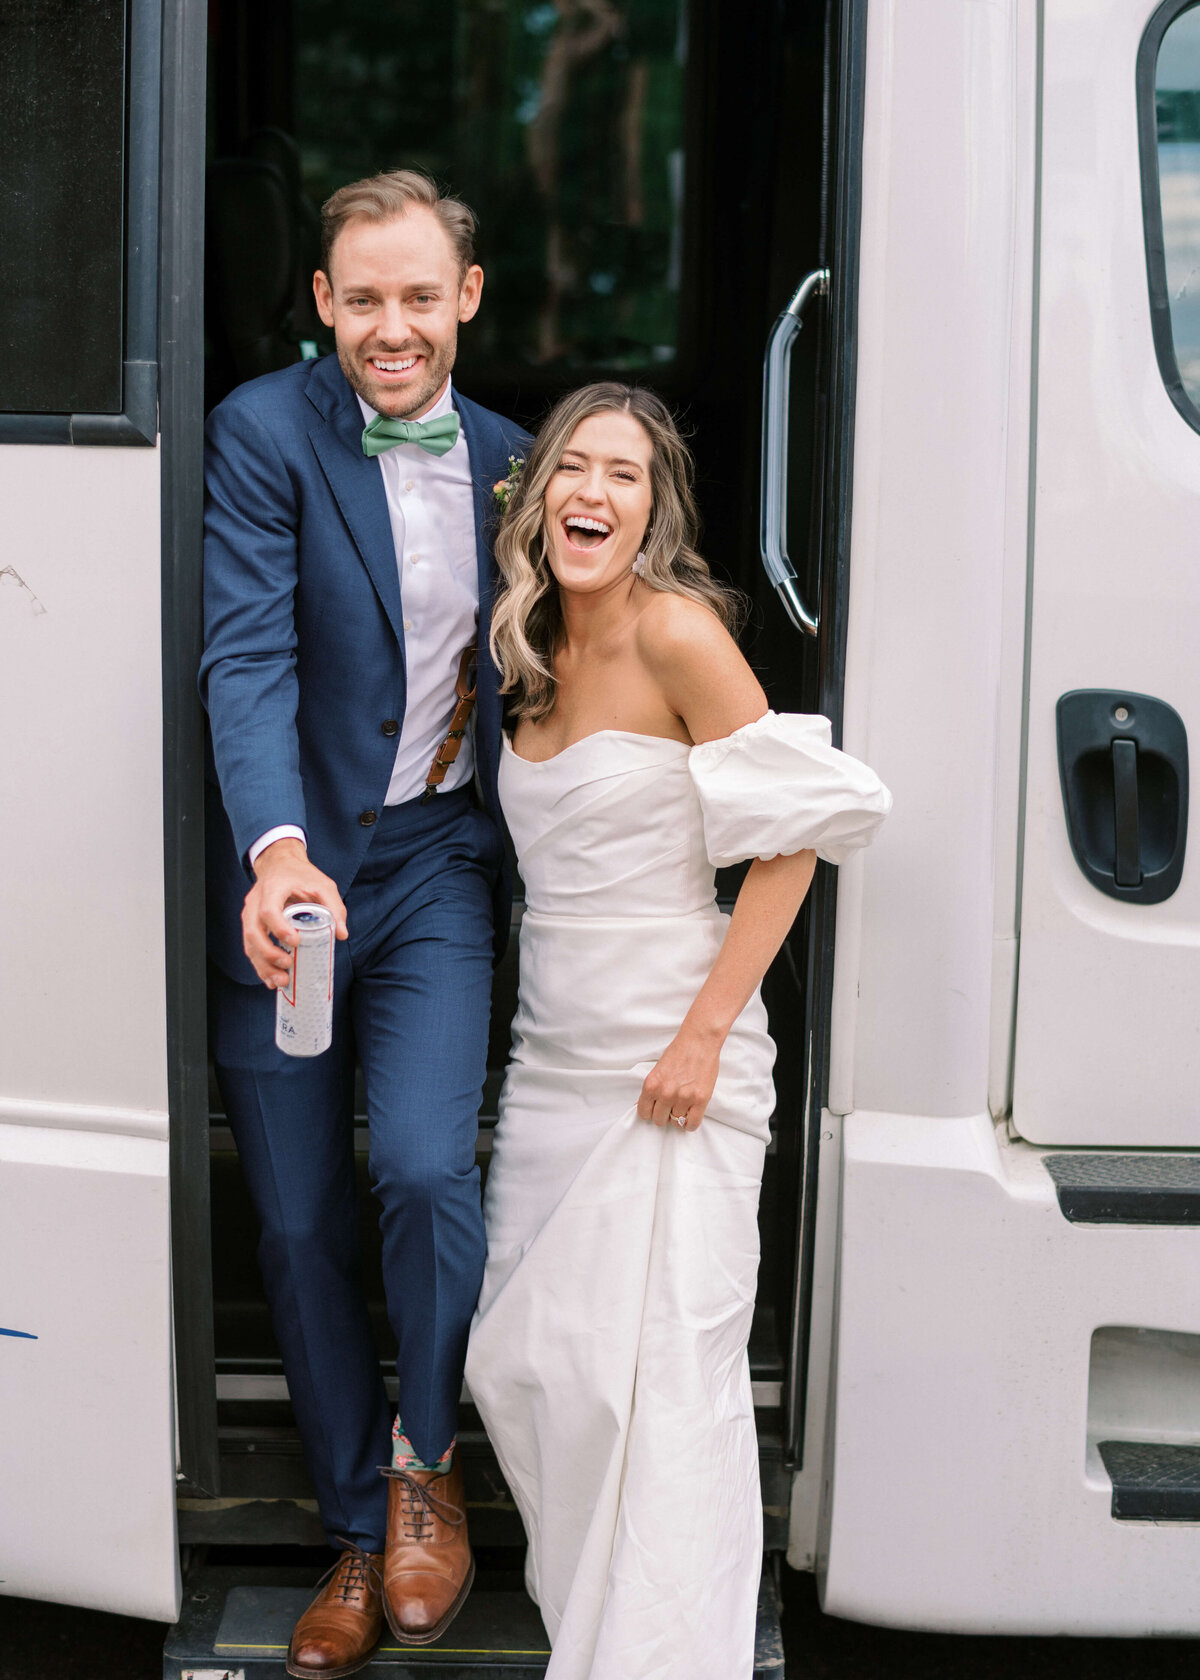 Virginia Wedding Photographer captures brunette groom and bride as they exit their party bus for their reception